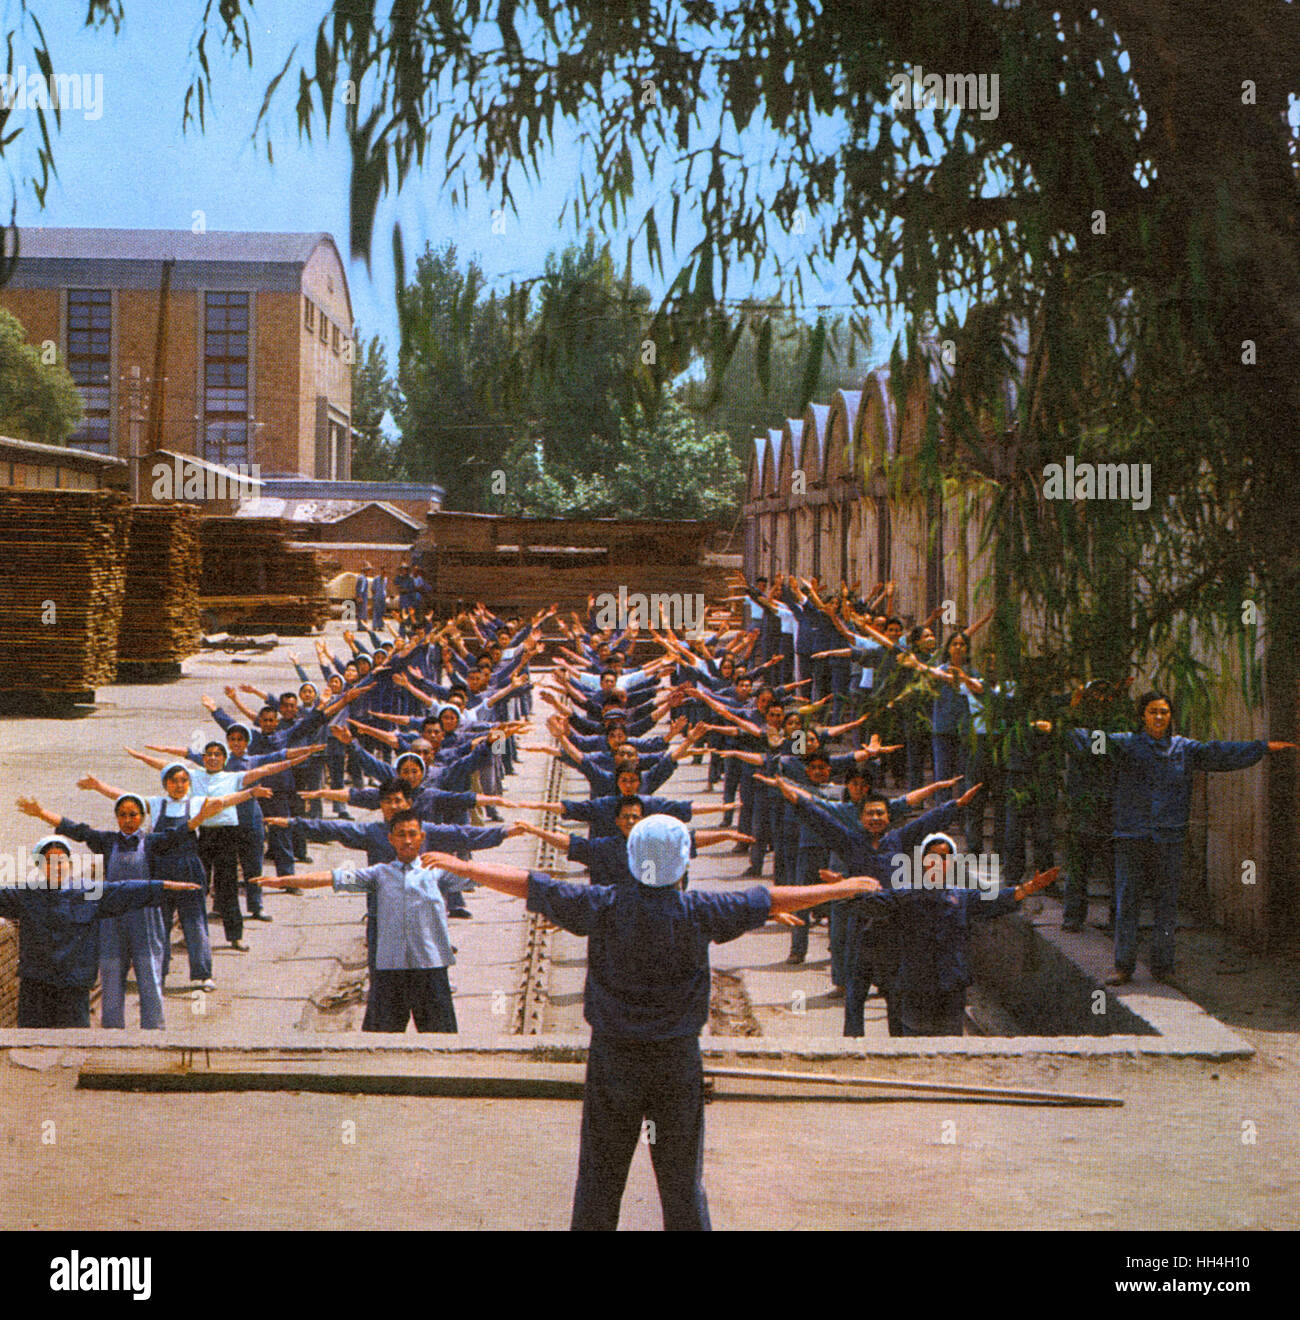 Communal exercise session for timberyard workers during the Cultural Revolution era in Communist China. Stock Photo